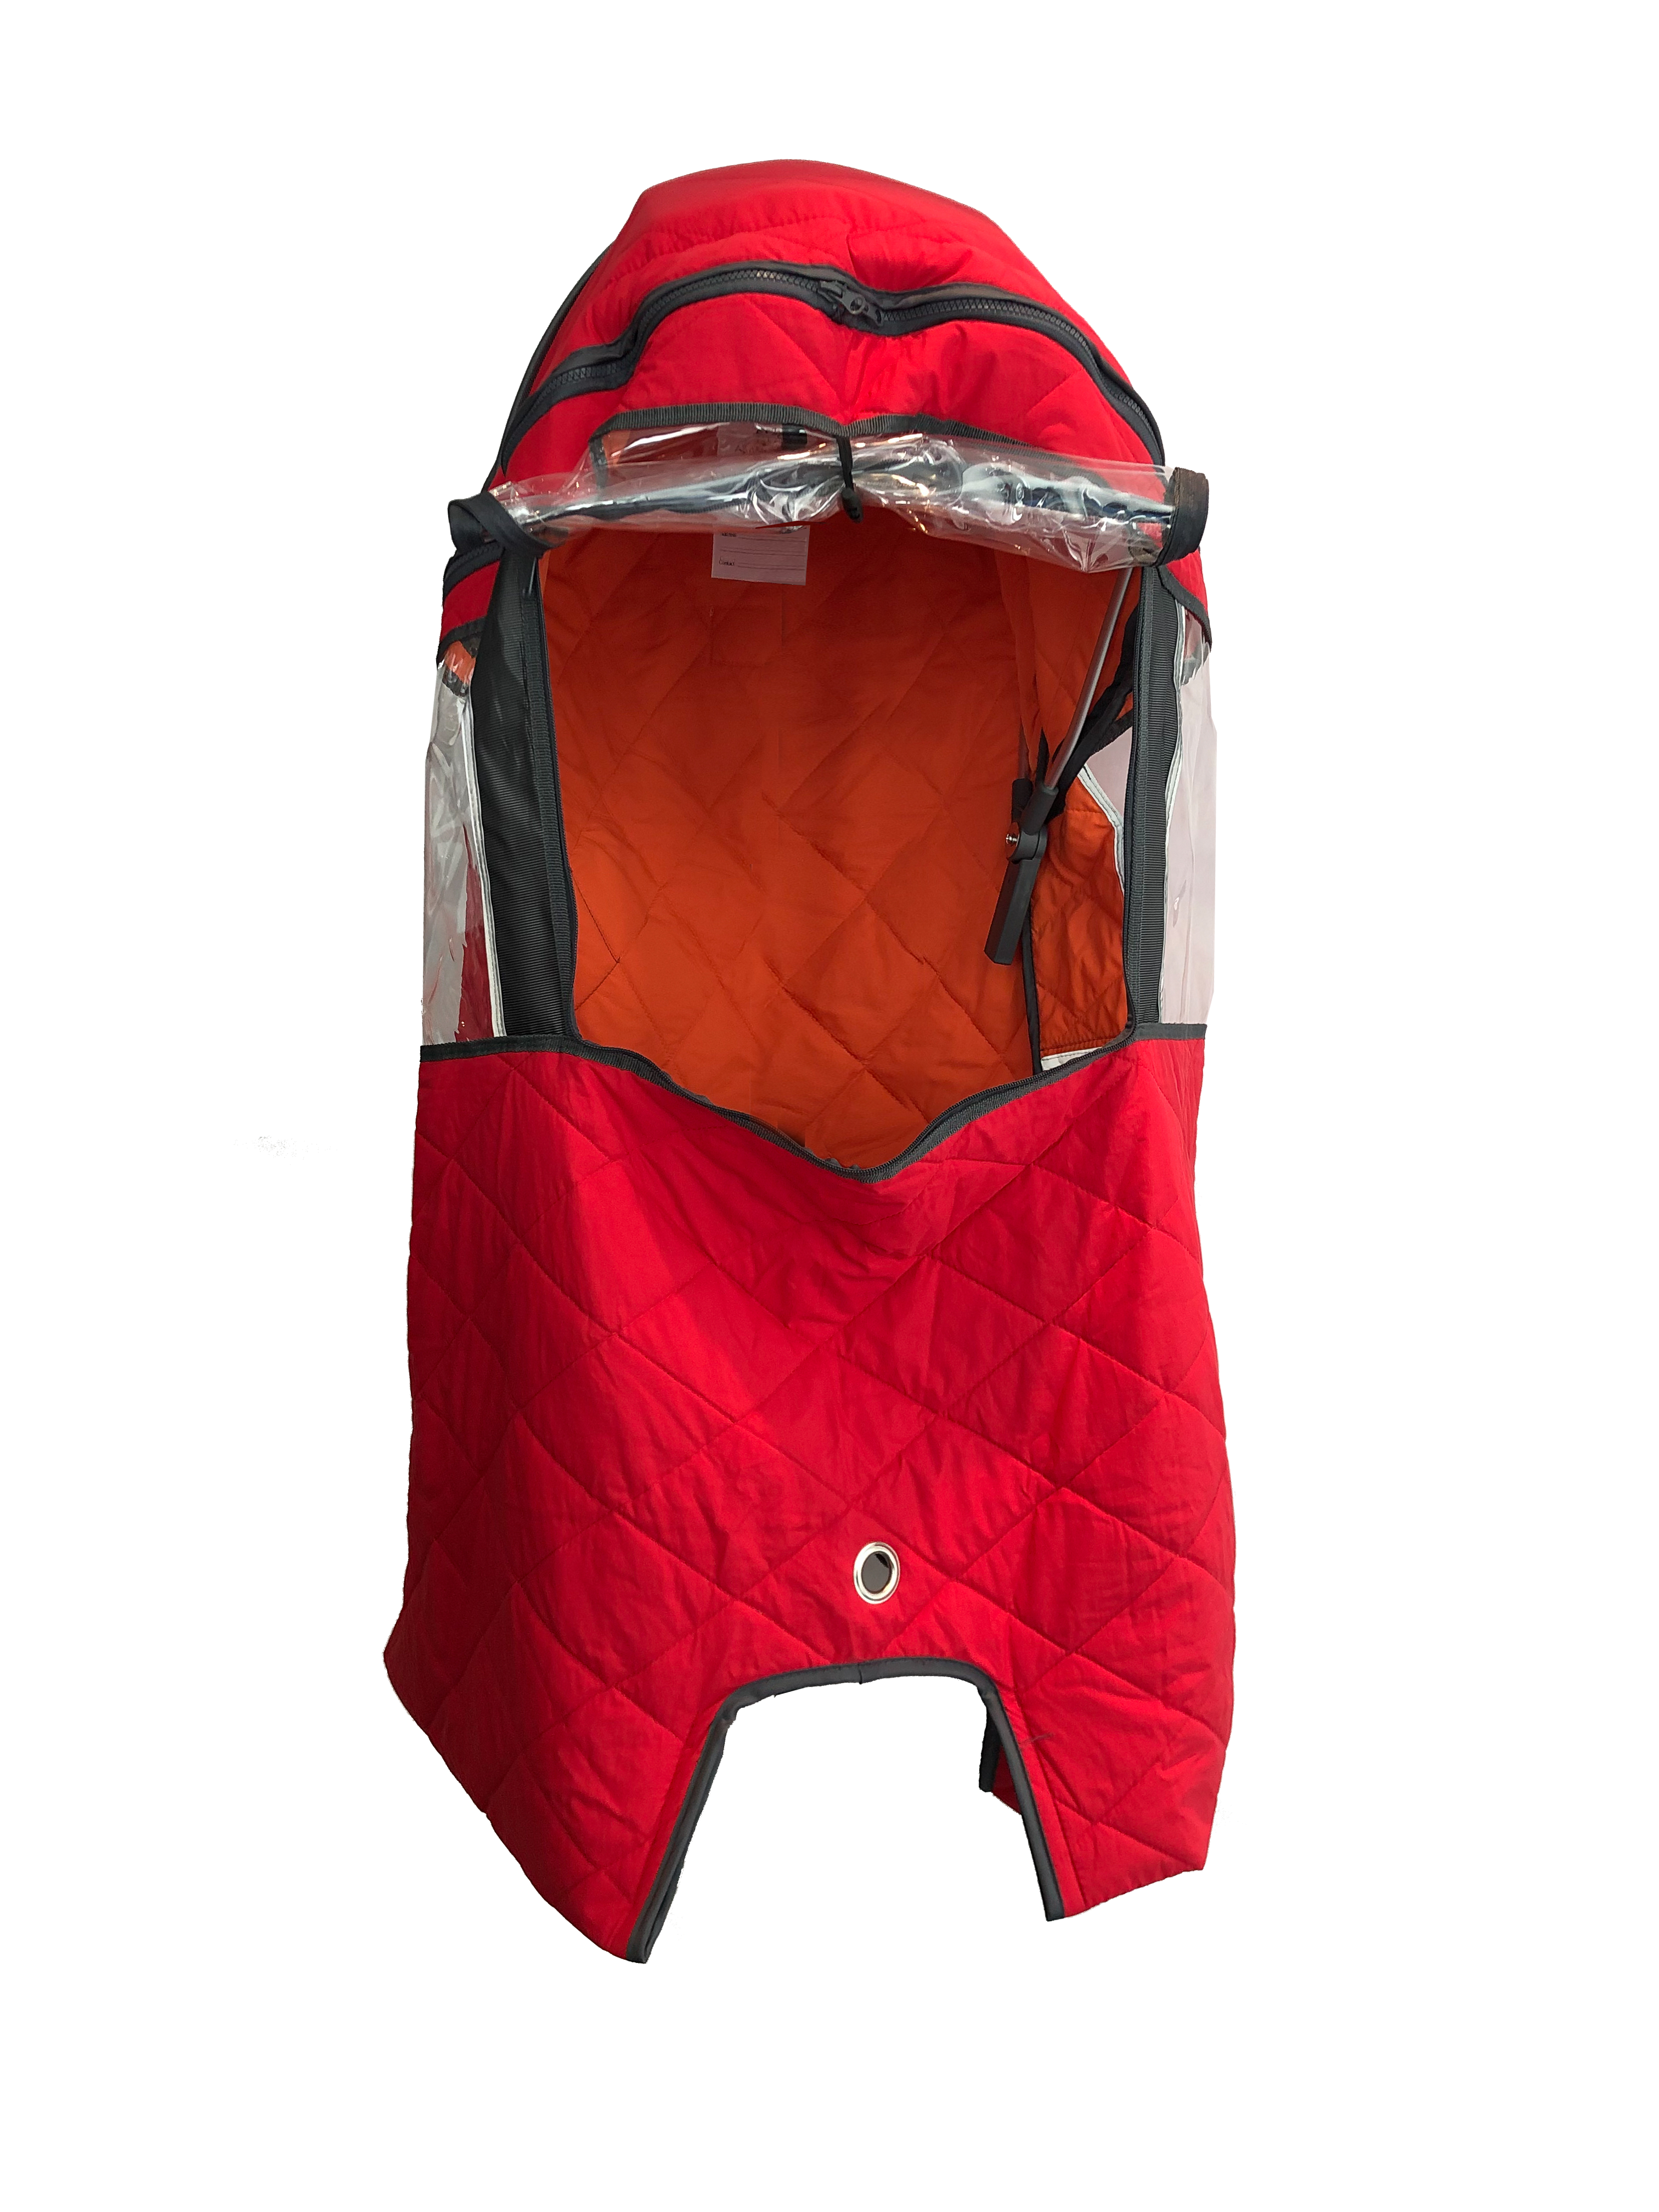 Children's rain cover for bicycle seat